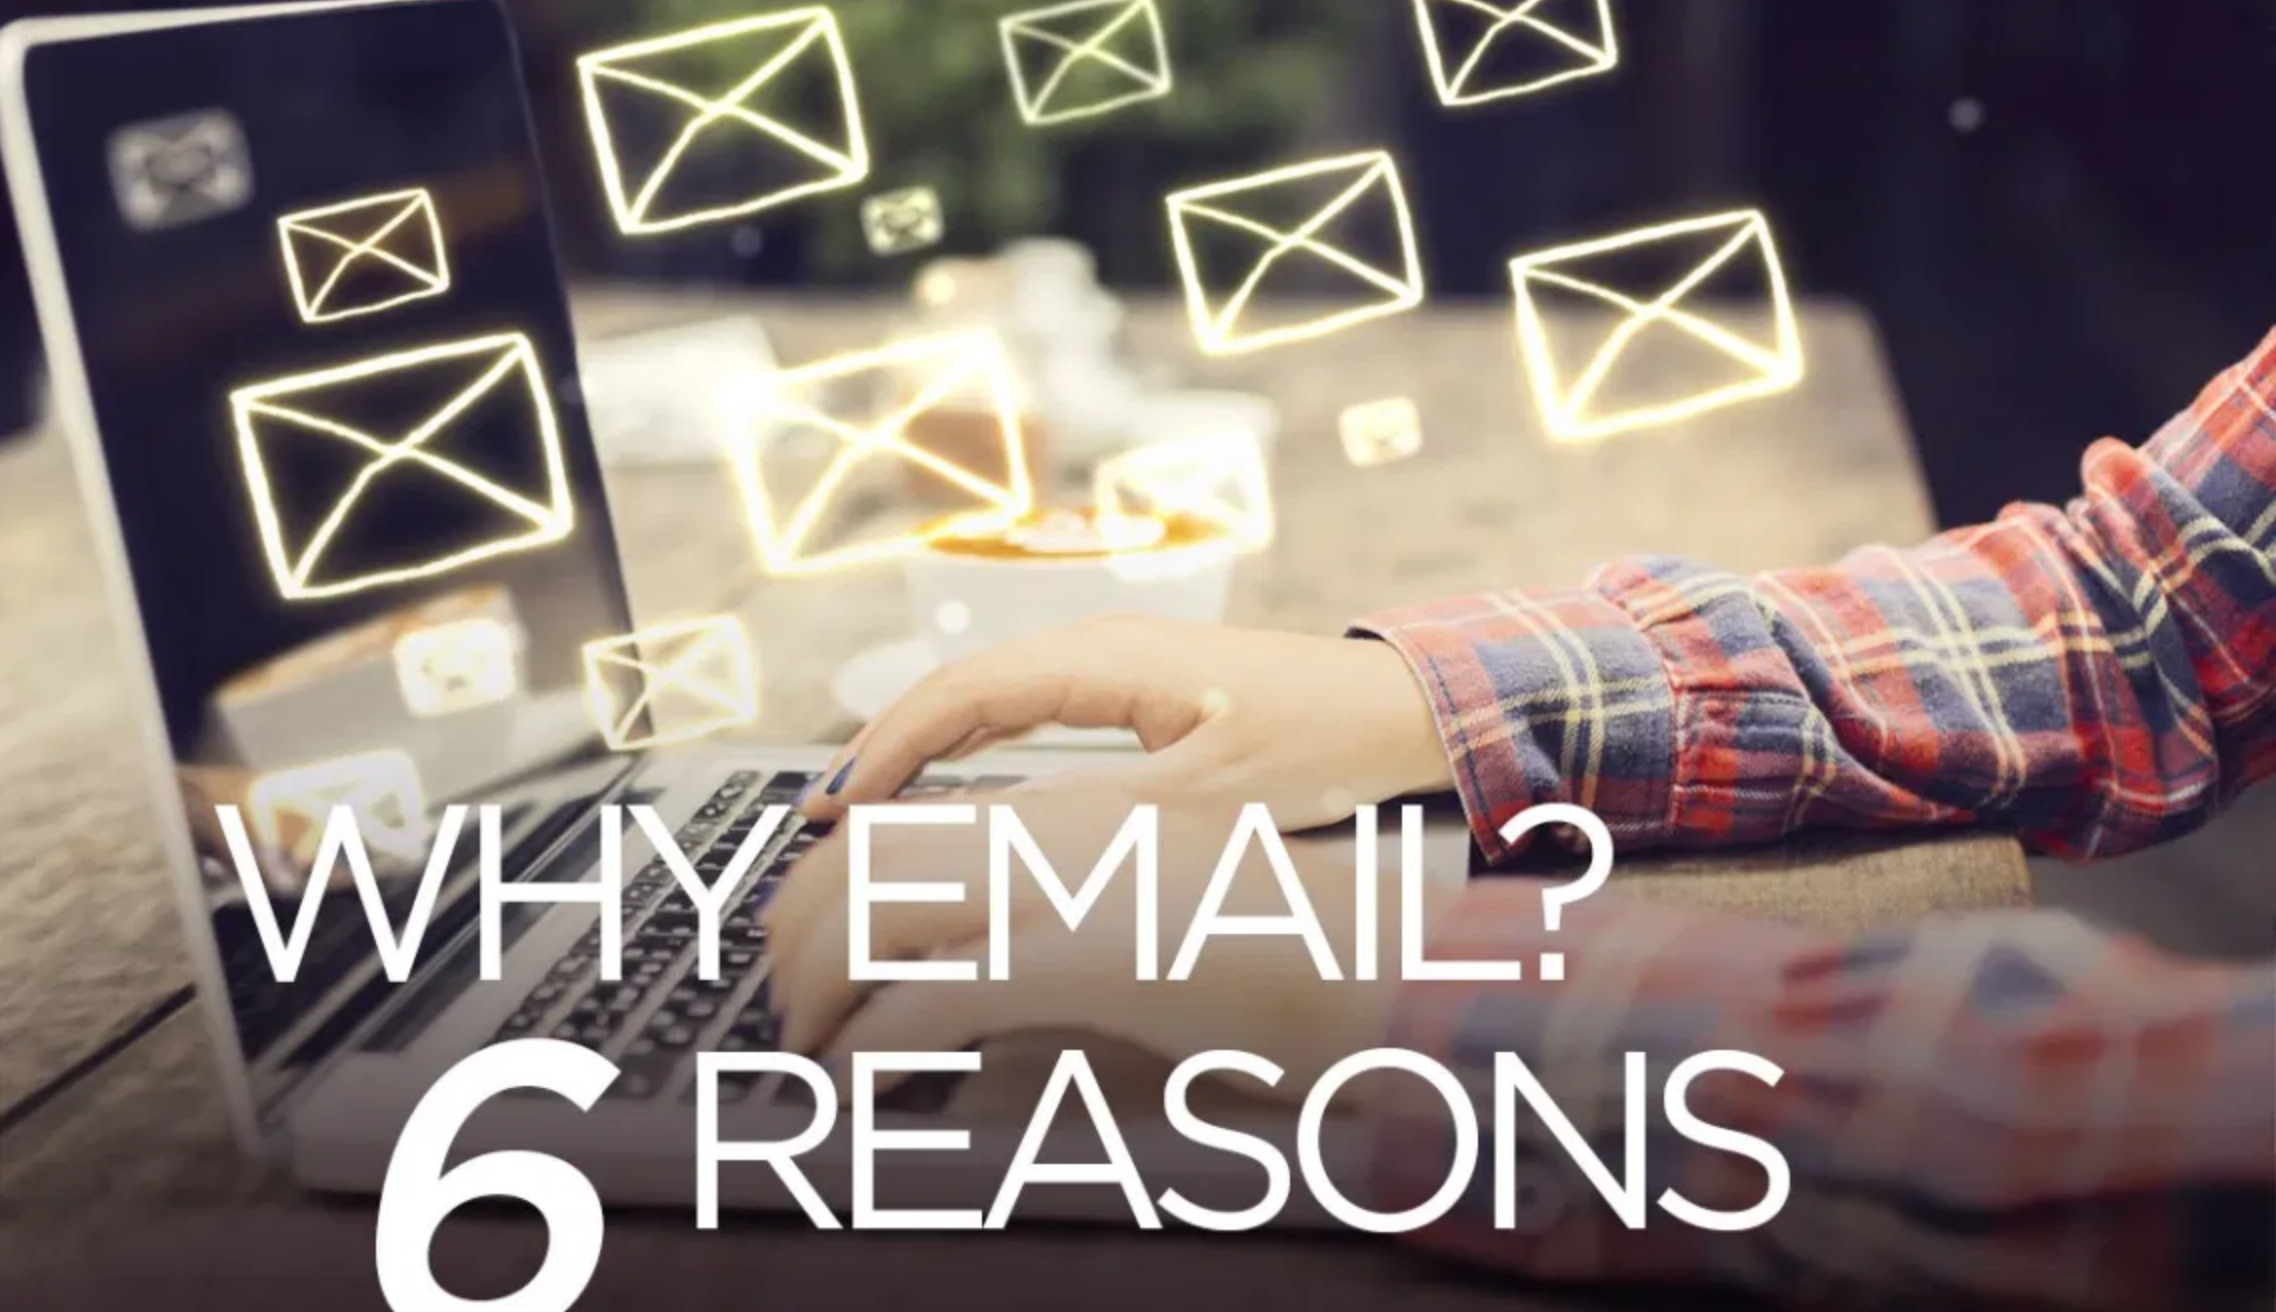 Featured image for “6 Reasons Why Email Marketing is so important to the success of your business”